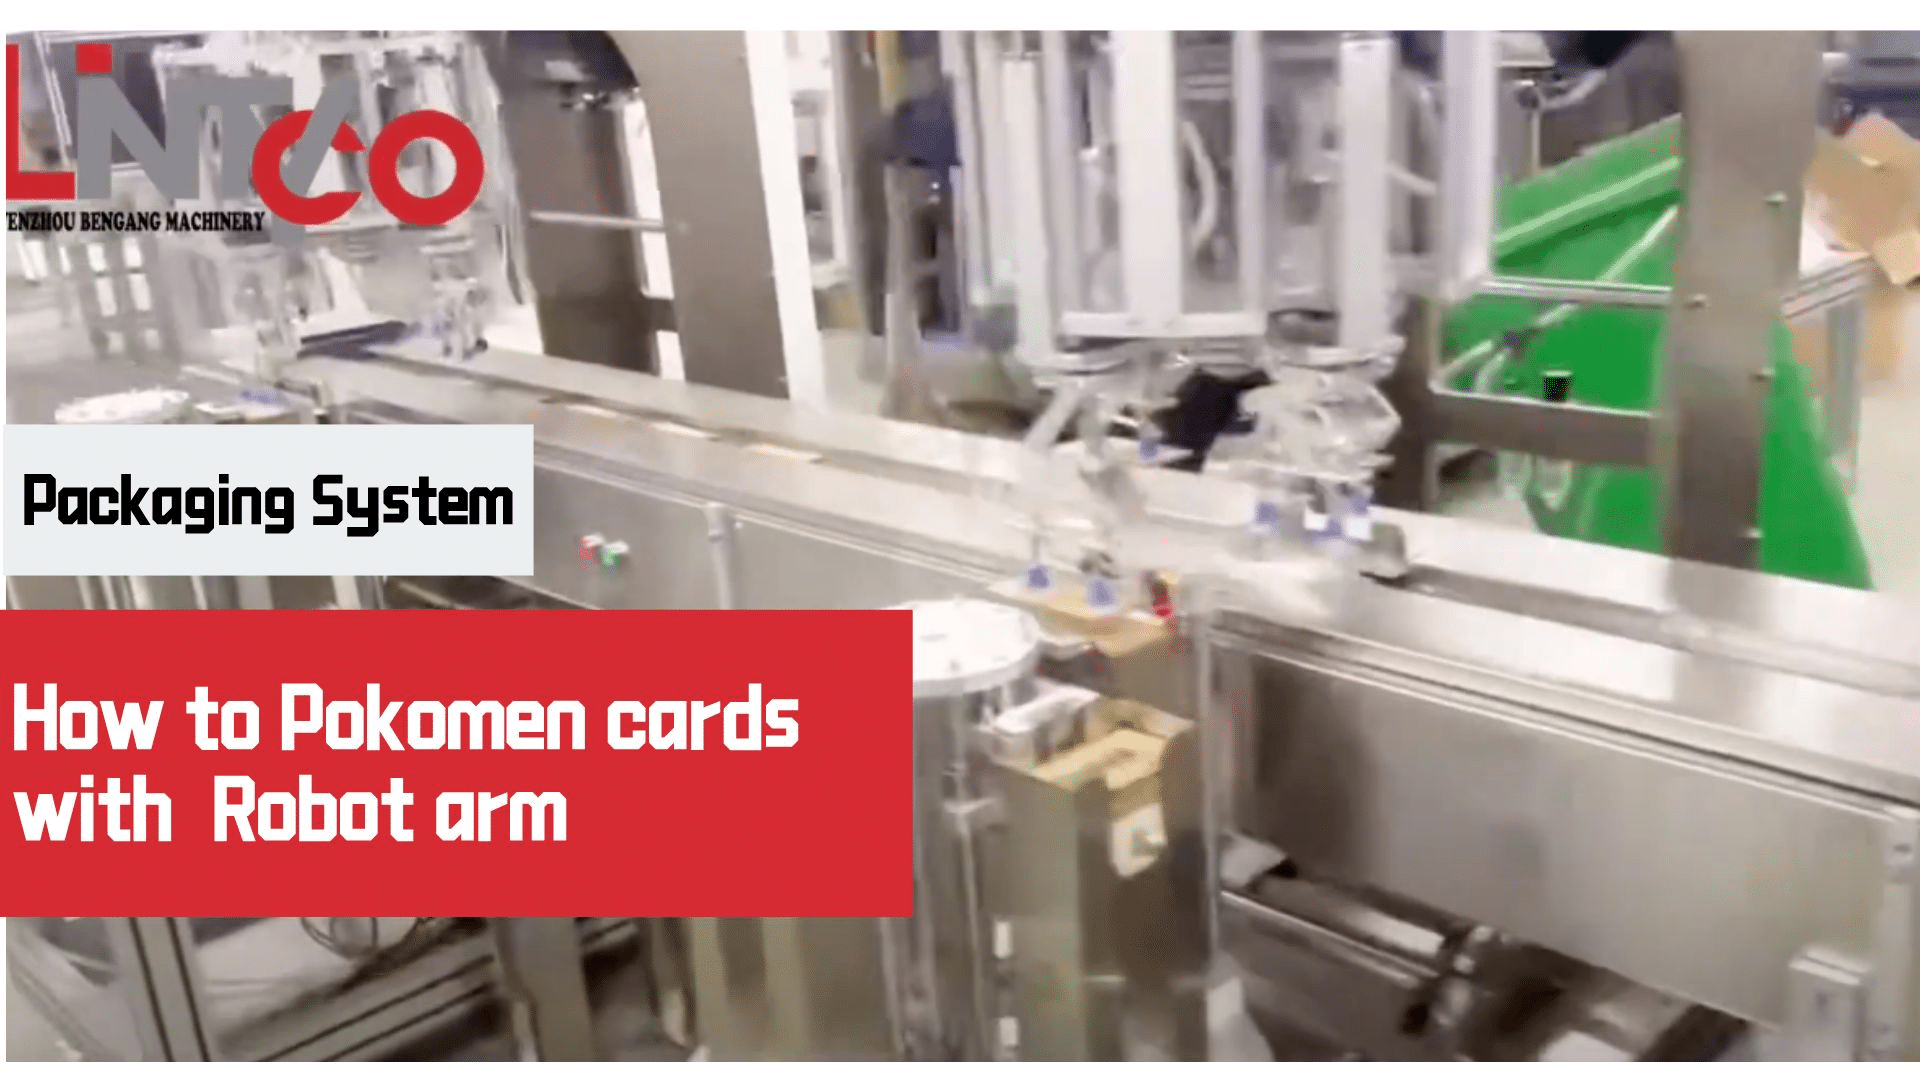 How to pack pokomen cards with robot arm